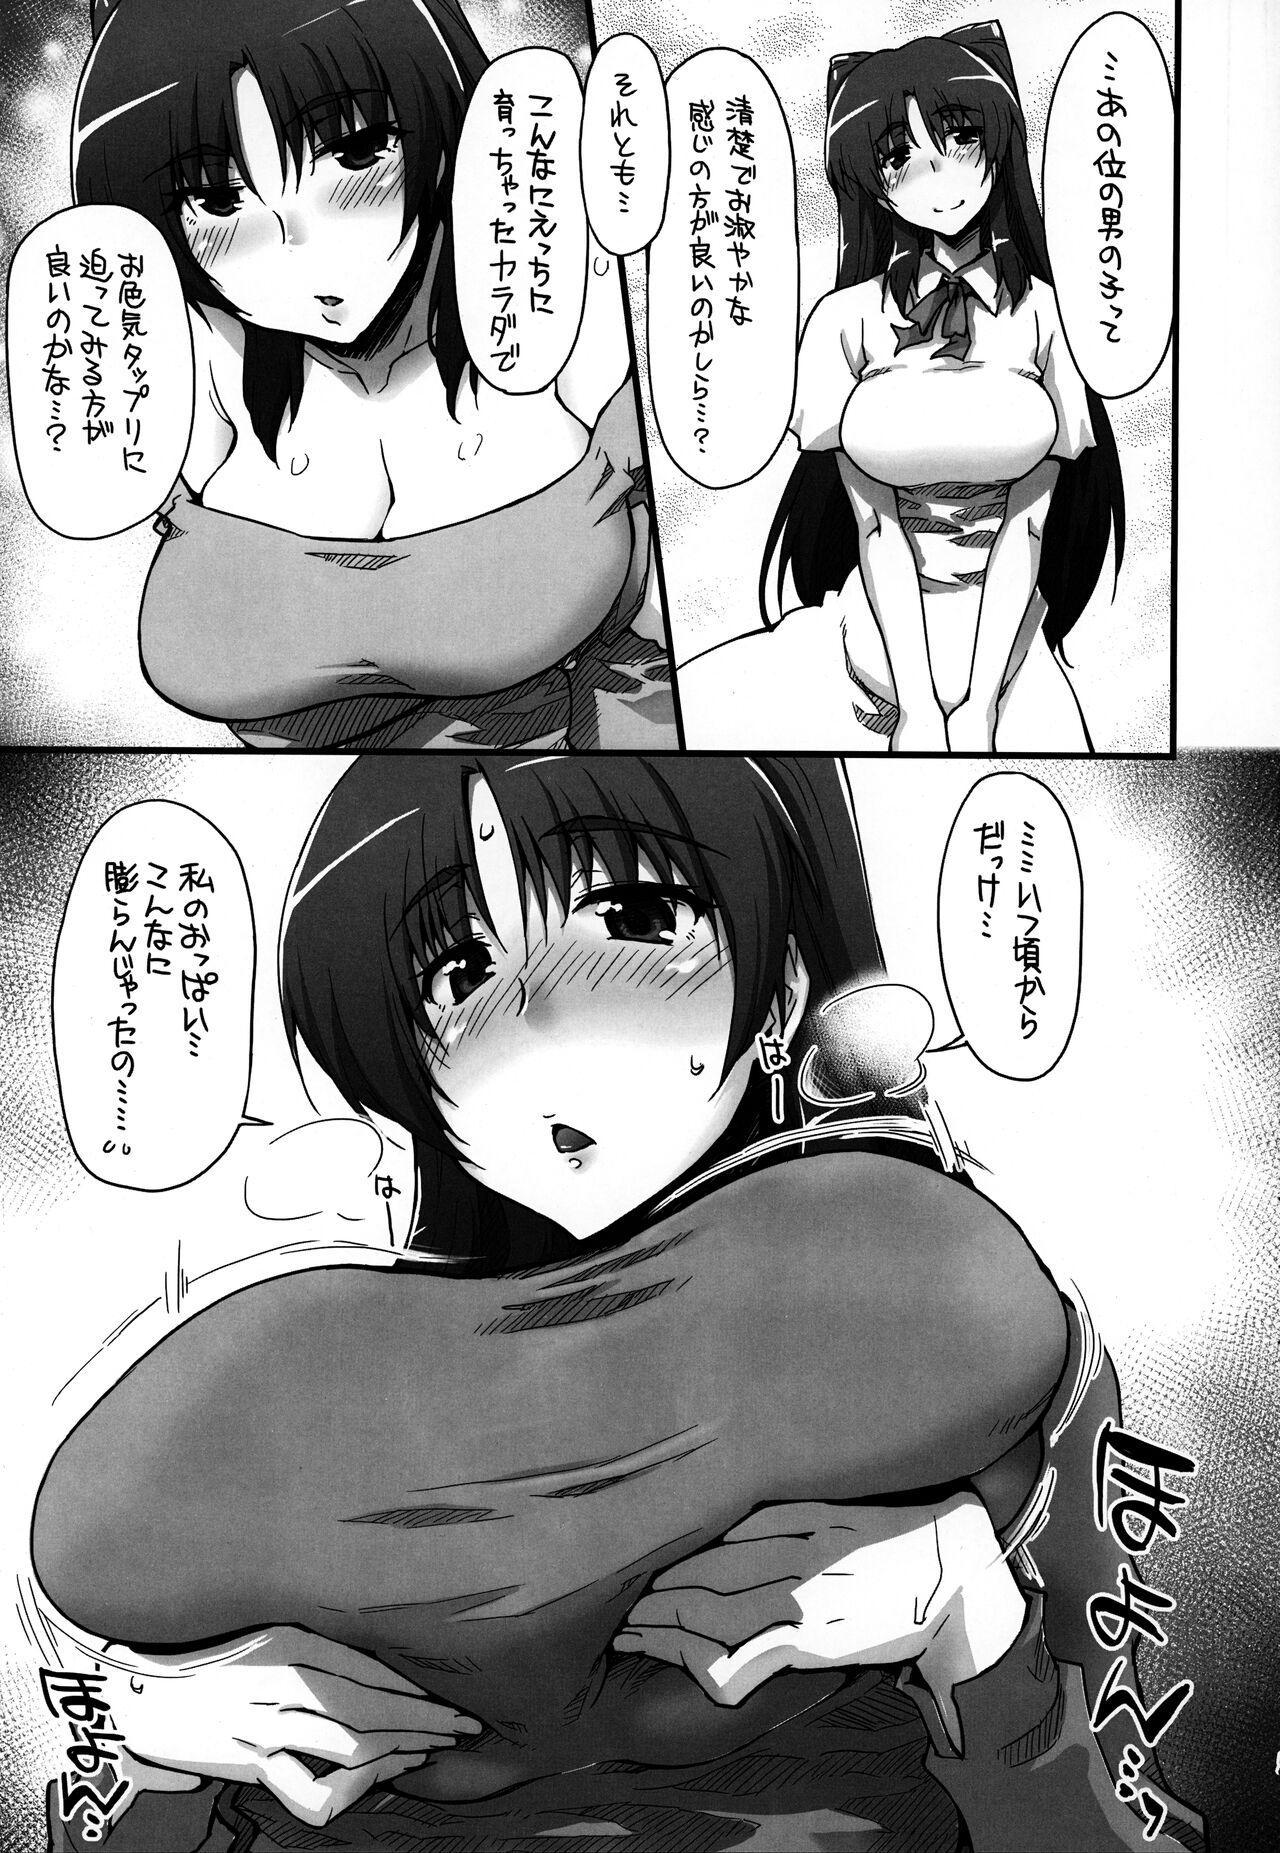 Eating Complex-5. E.N.Complex! - The idolmaster Toheart2 Prostitute - Page 4